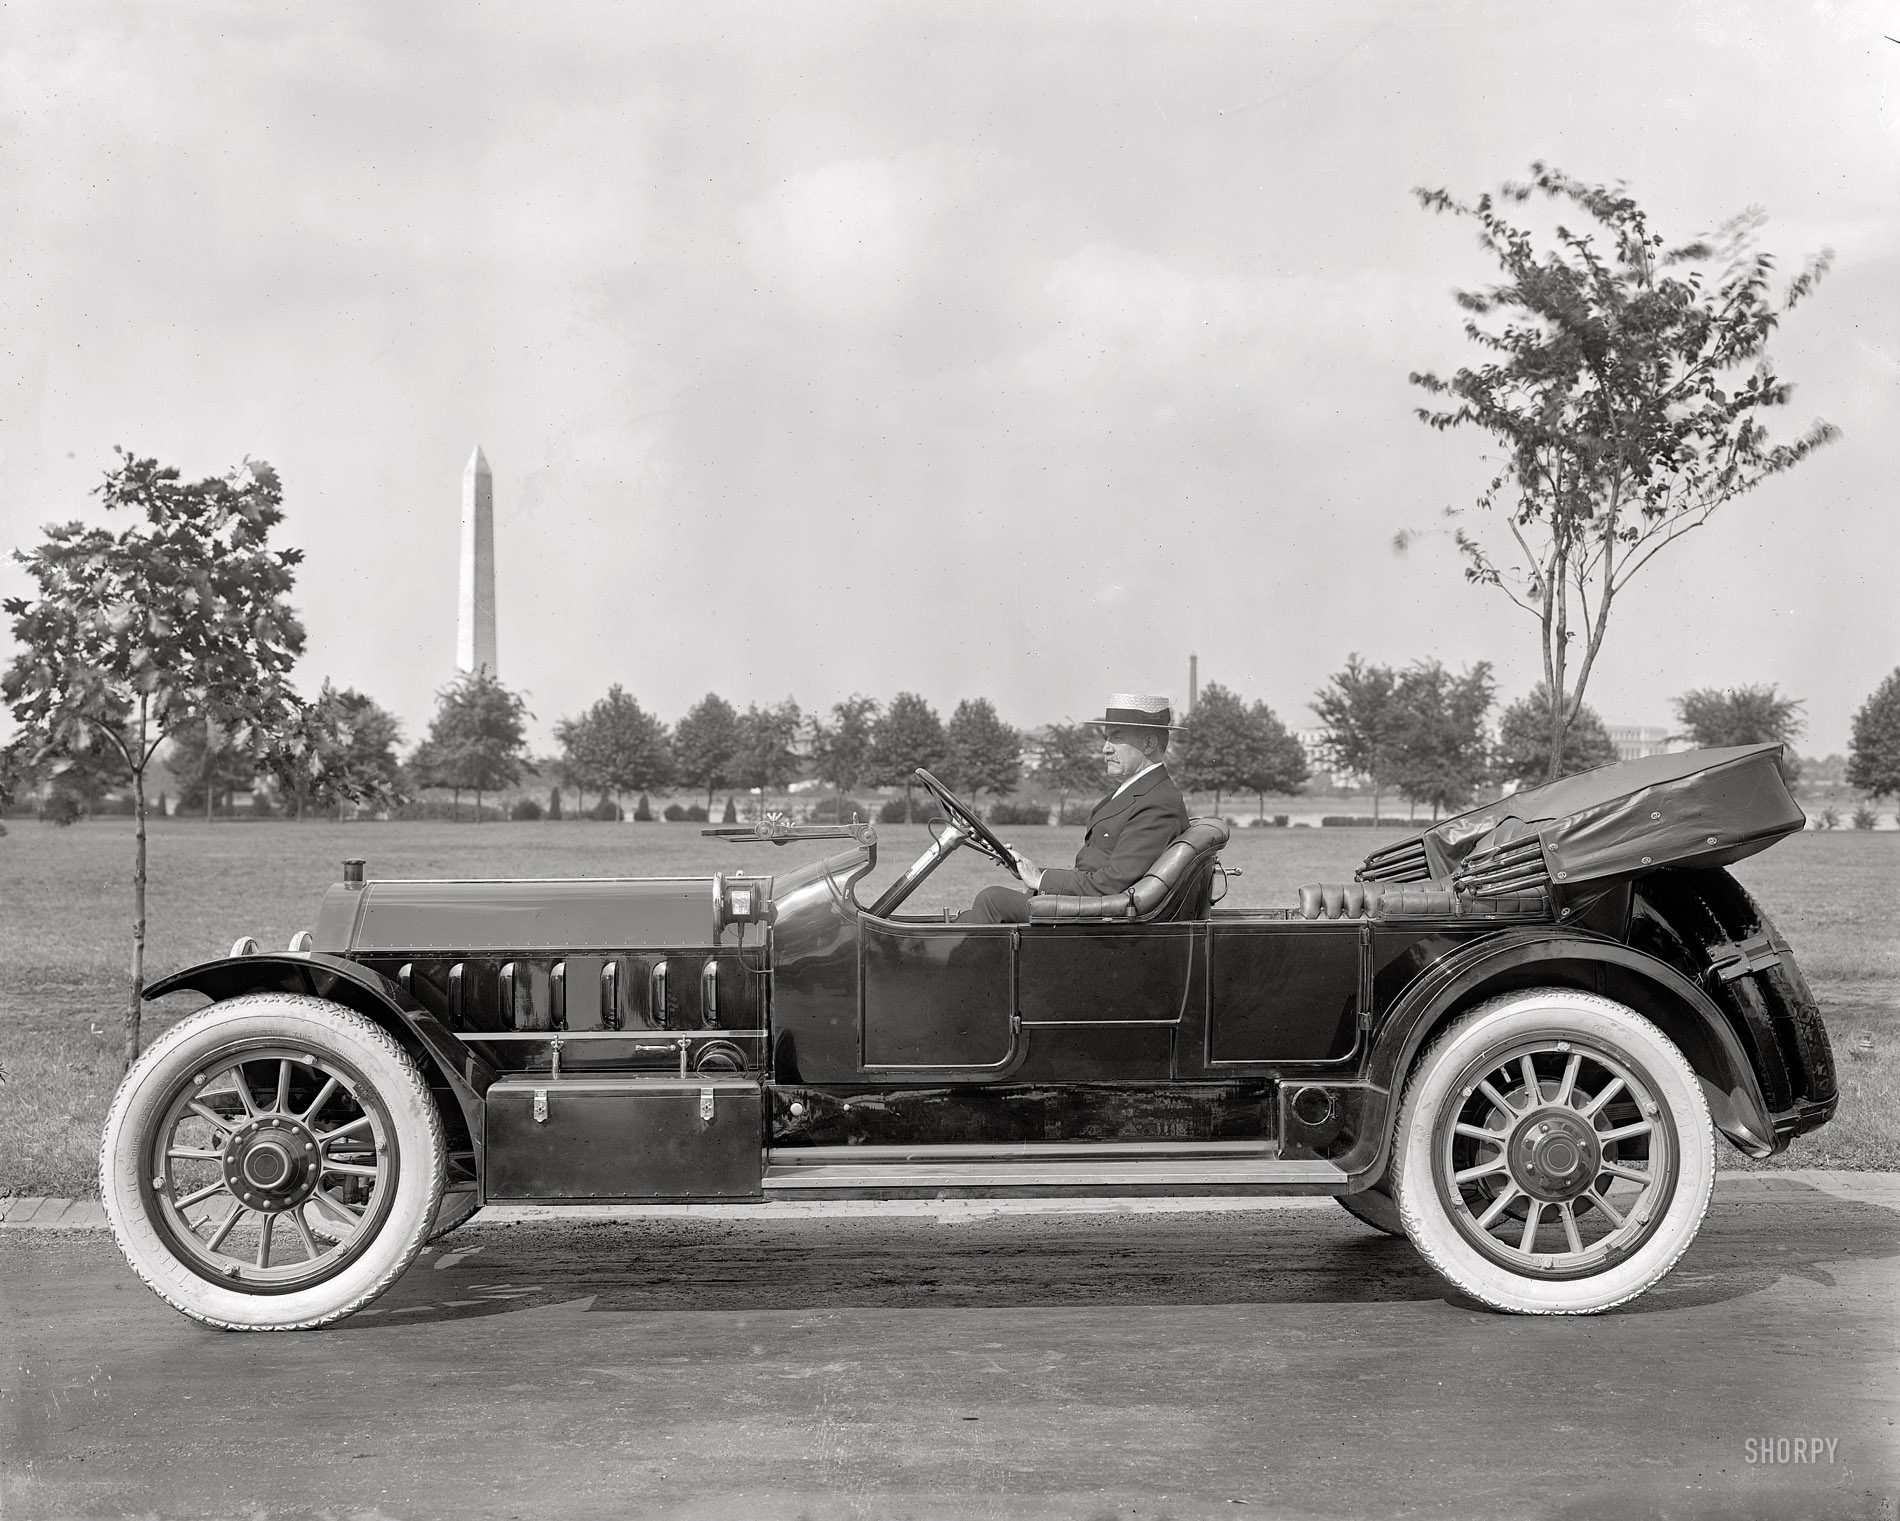 Washington, D.C. "Marmon Motor Car Co." I'll say circa 1915 and wait for the experts to weigh in. Harris & Ewing Collection glass negative. View full size. [The consensus seems to be that this is a 1914 Marmon "48" seven-passenger touring car, which listed for $5,000 -- a staggering sum in those days. It's riding on 37-inch Firestone "Quick Detachable" natural-rubber tires.]